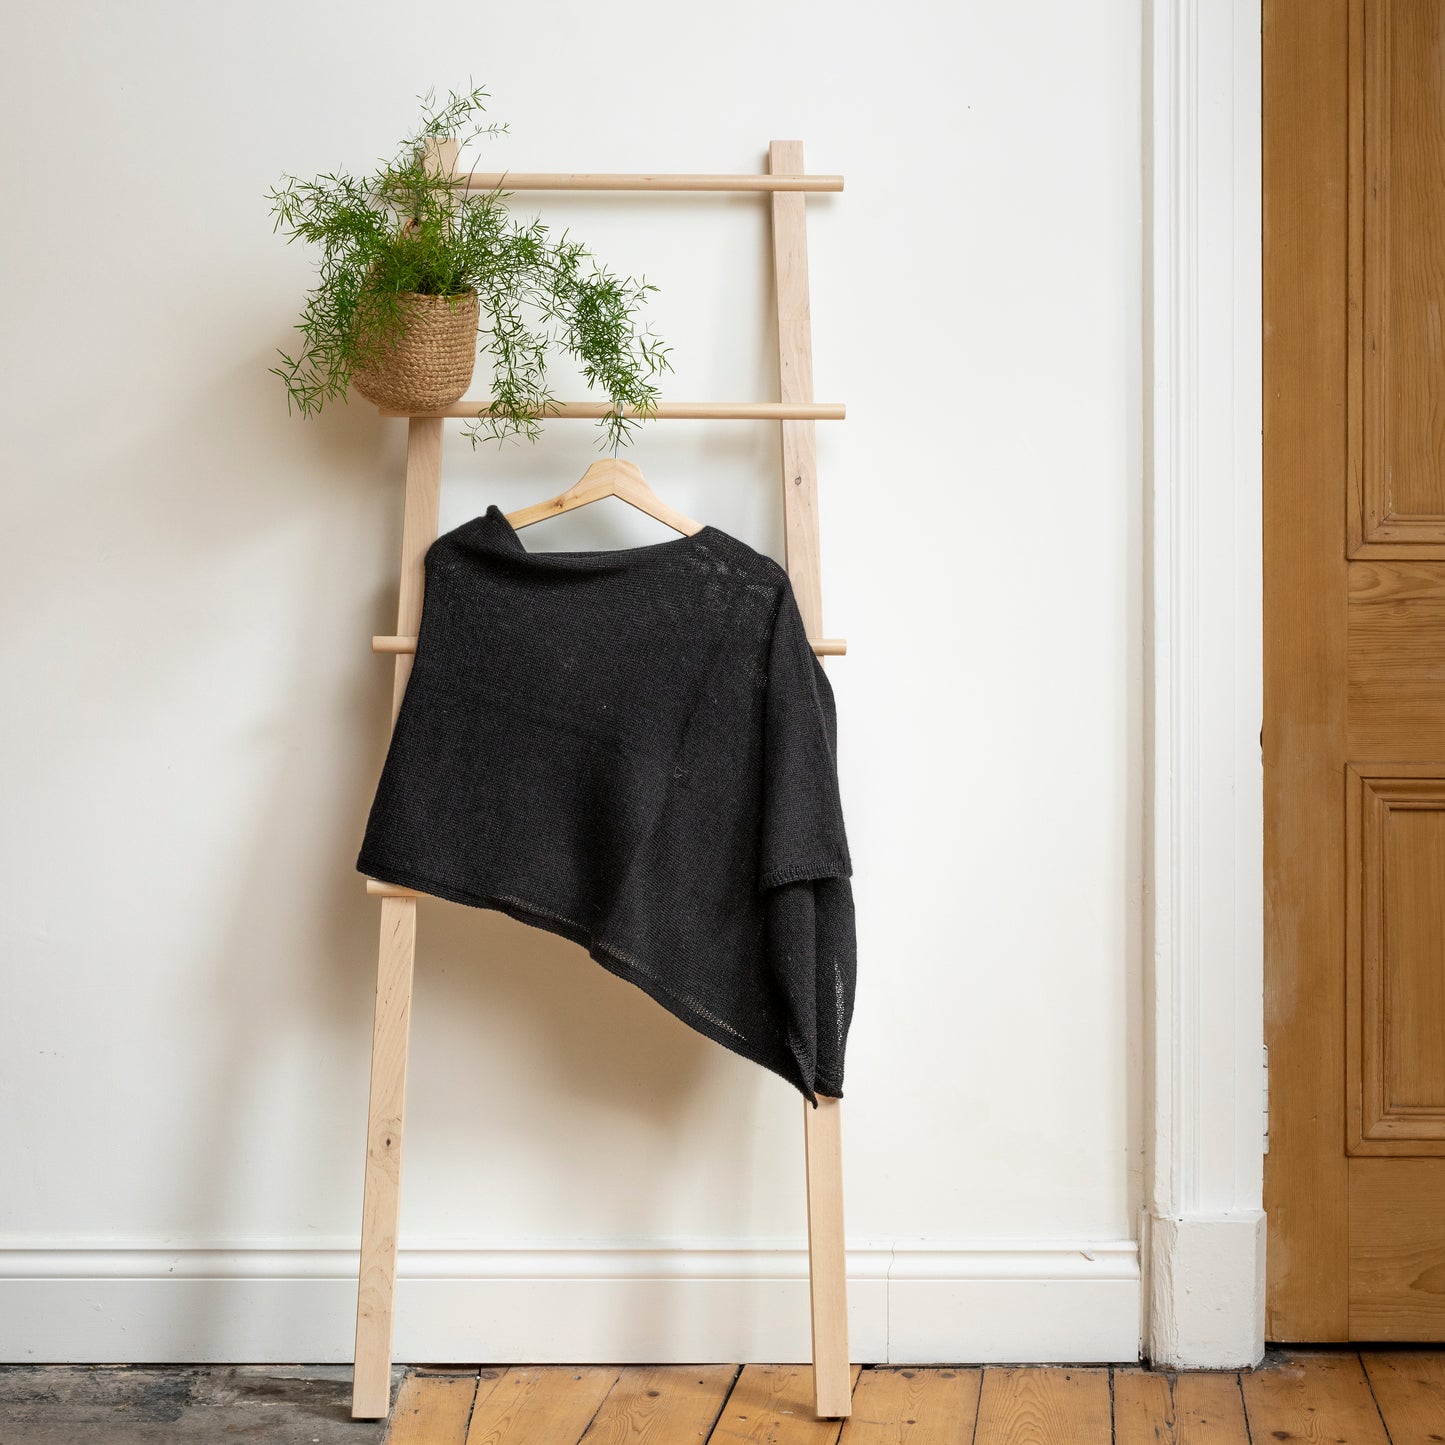 Asymmetrical charcoal luxury knitted poncho hanging on wooden ladder.